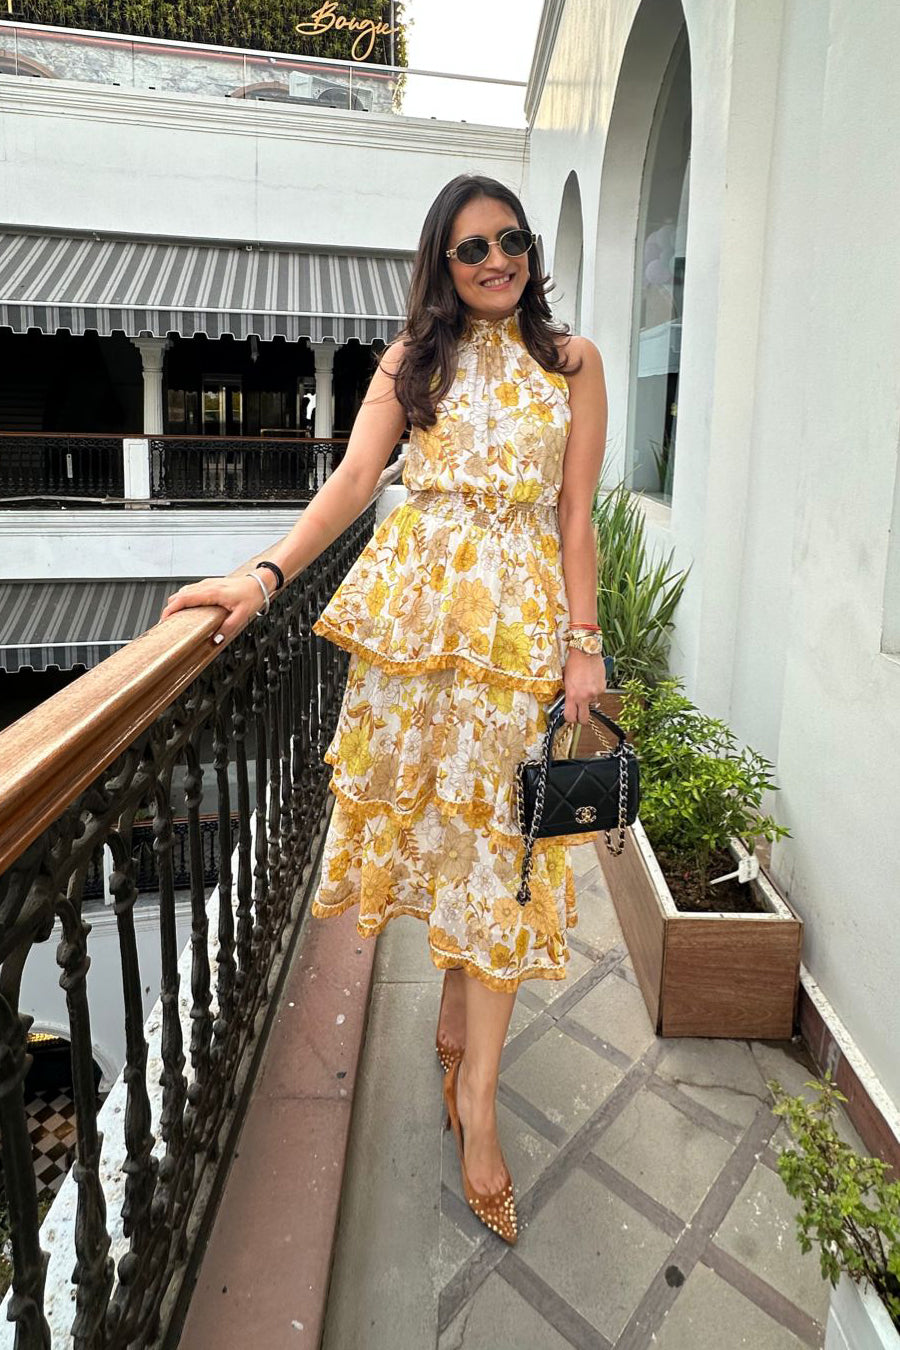 Printed floral tiered dress